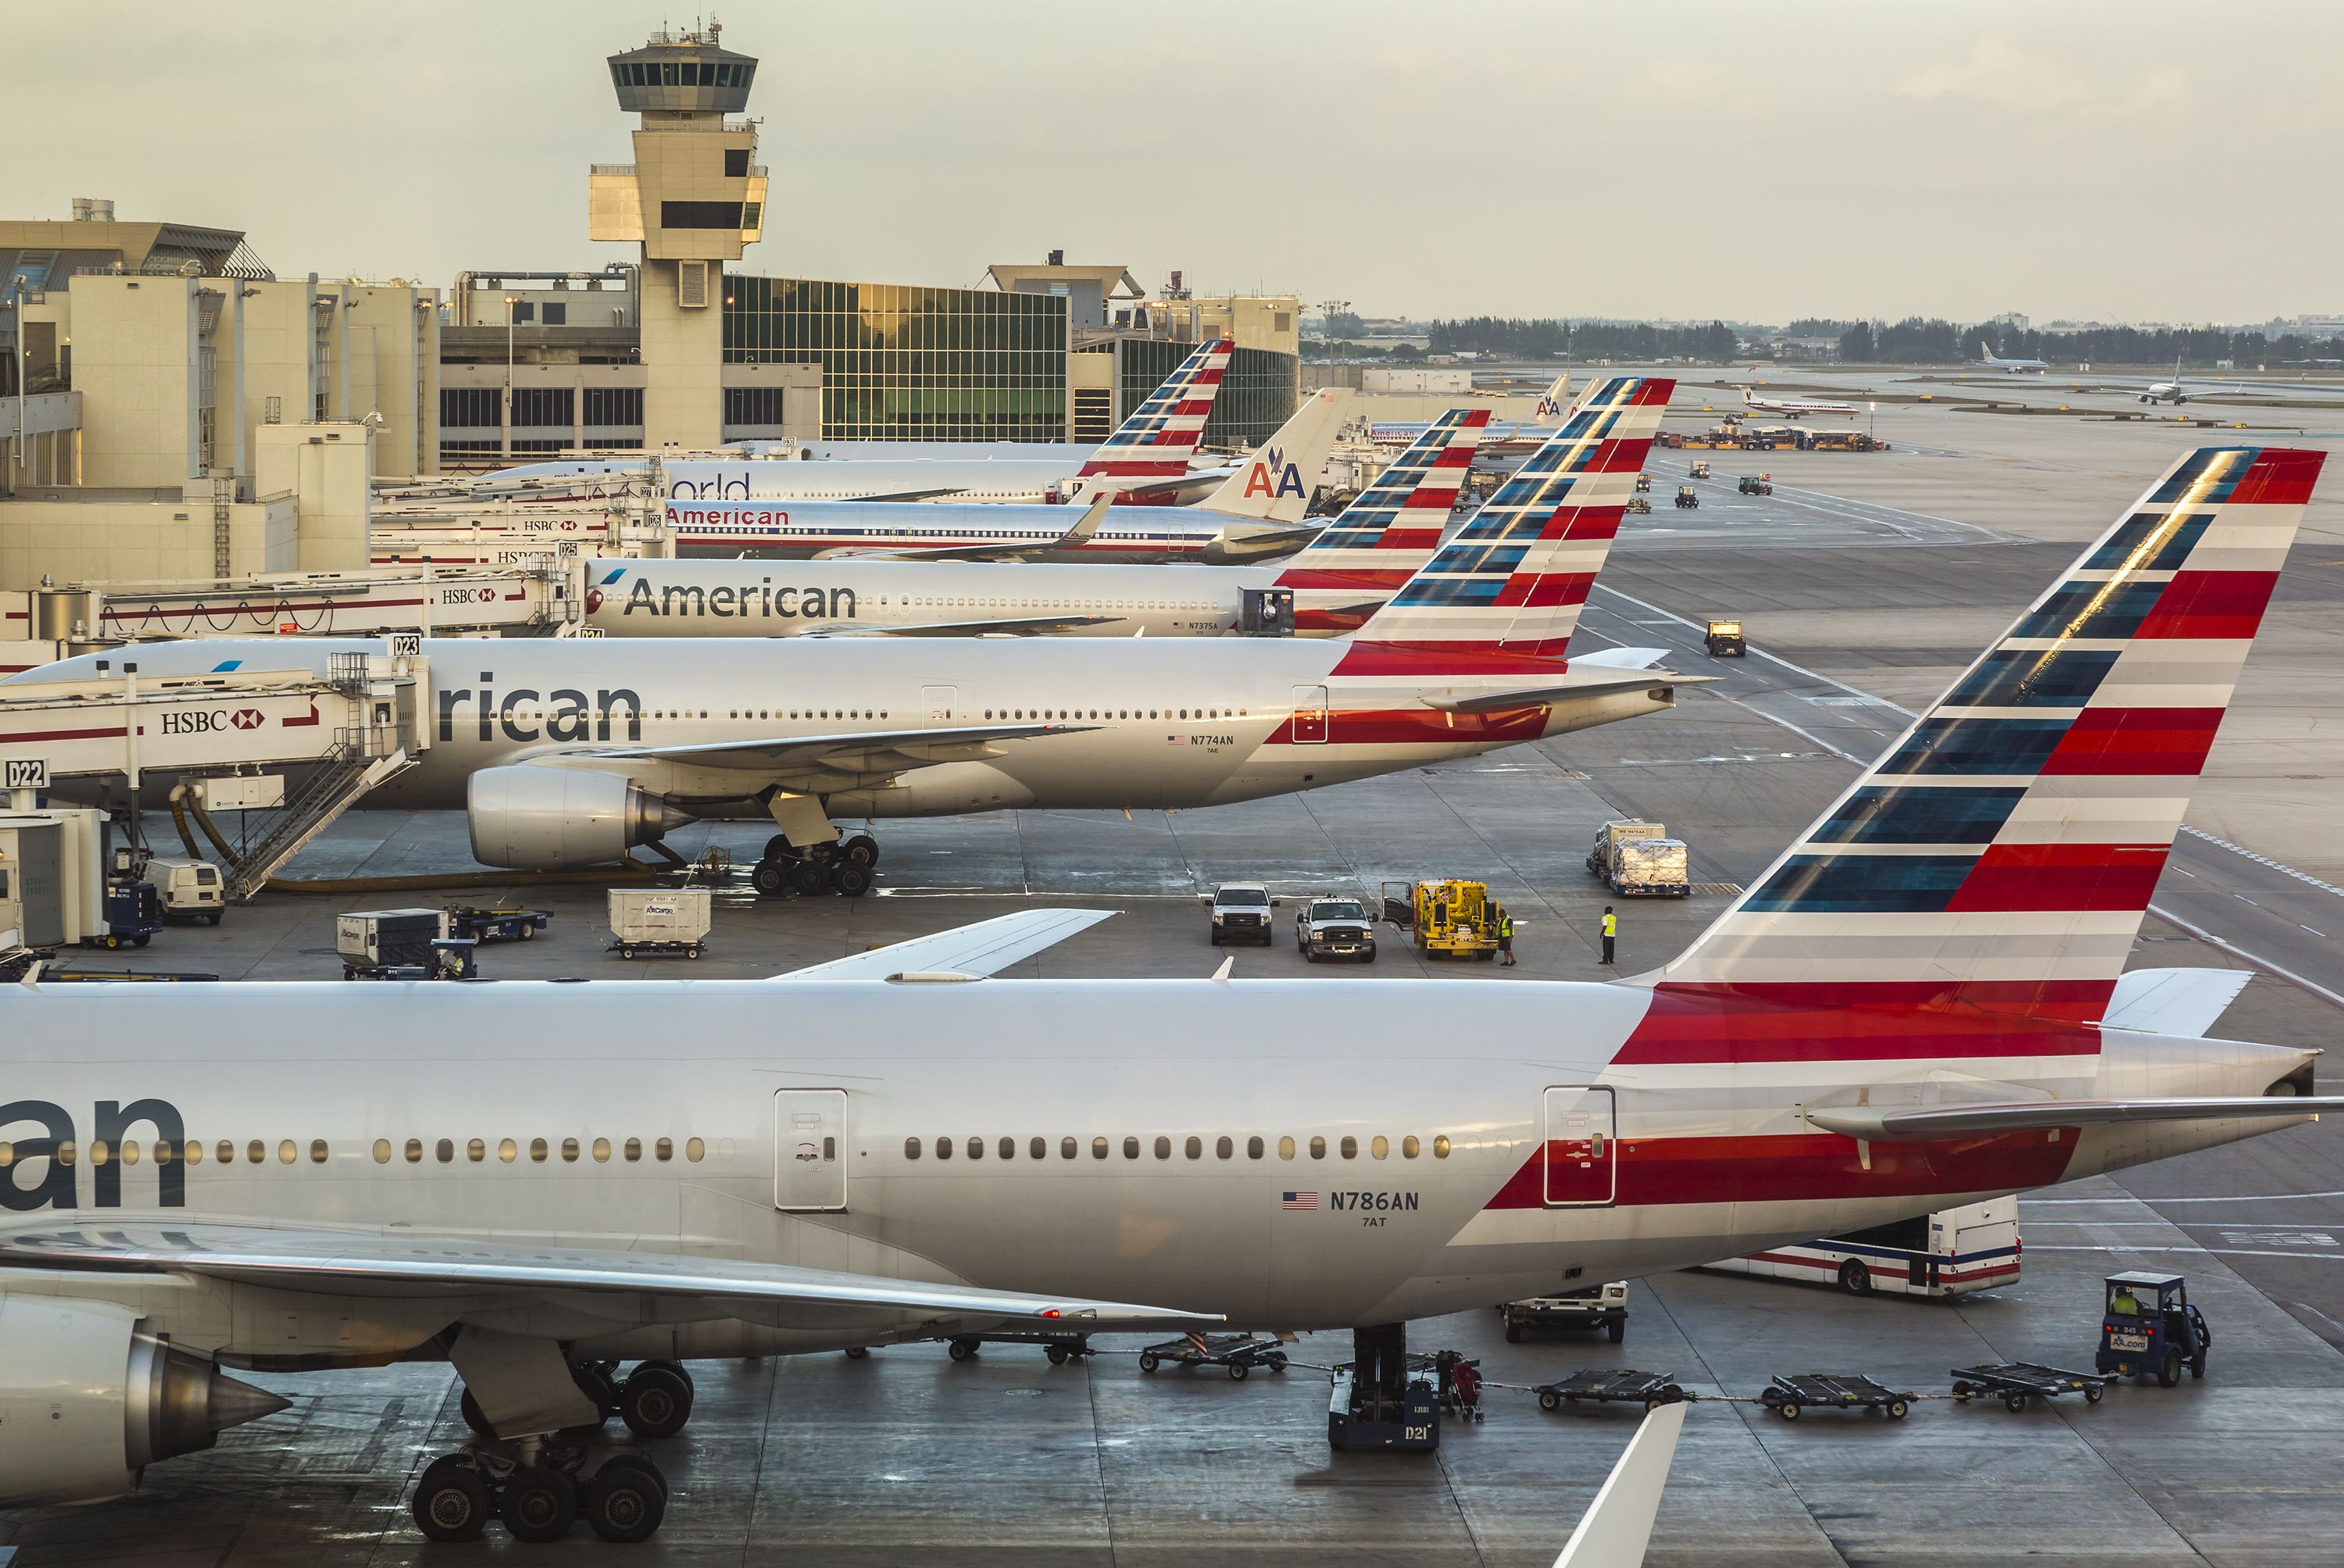 American Airlines aircraft at Miami International Airport